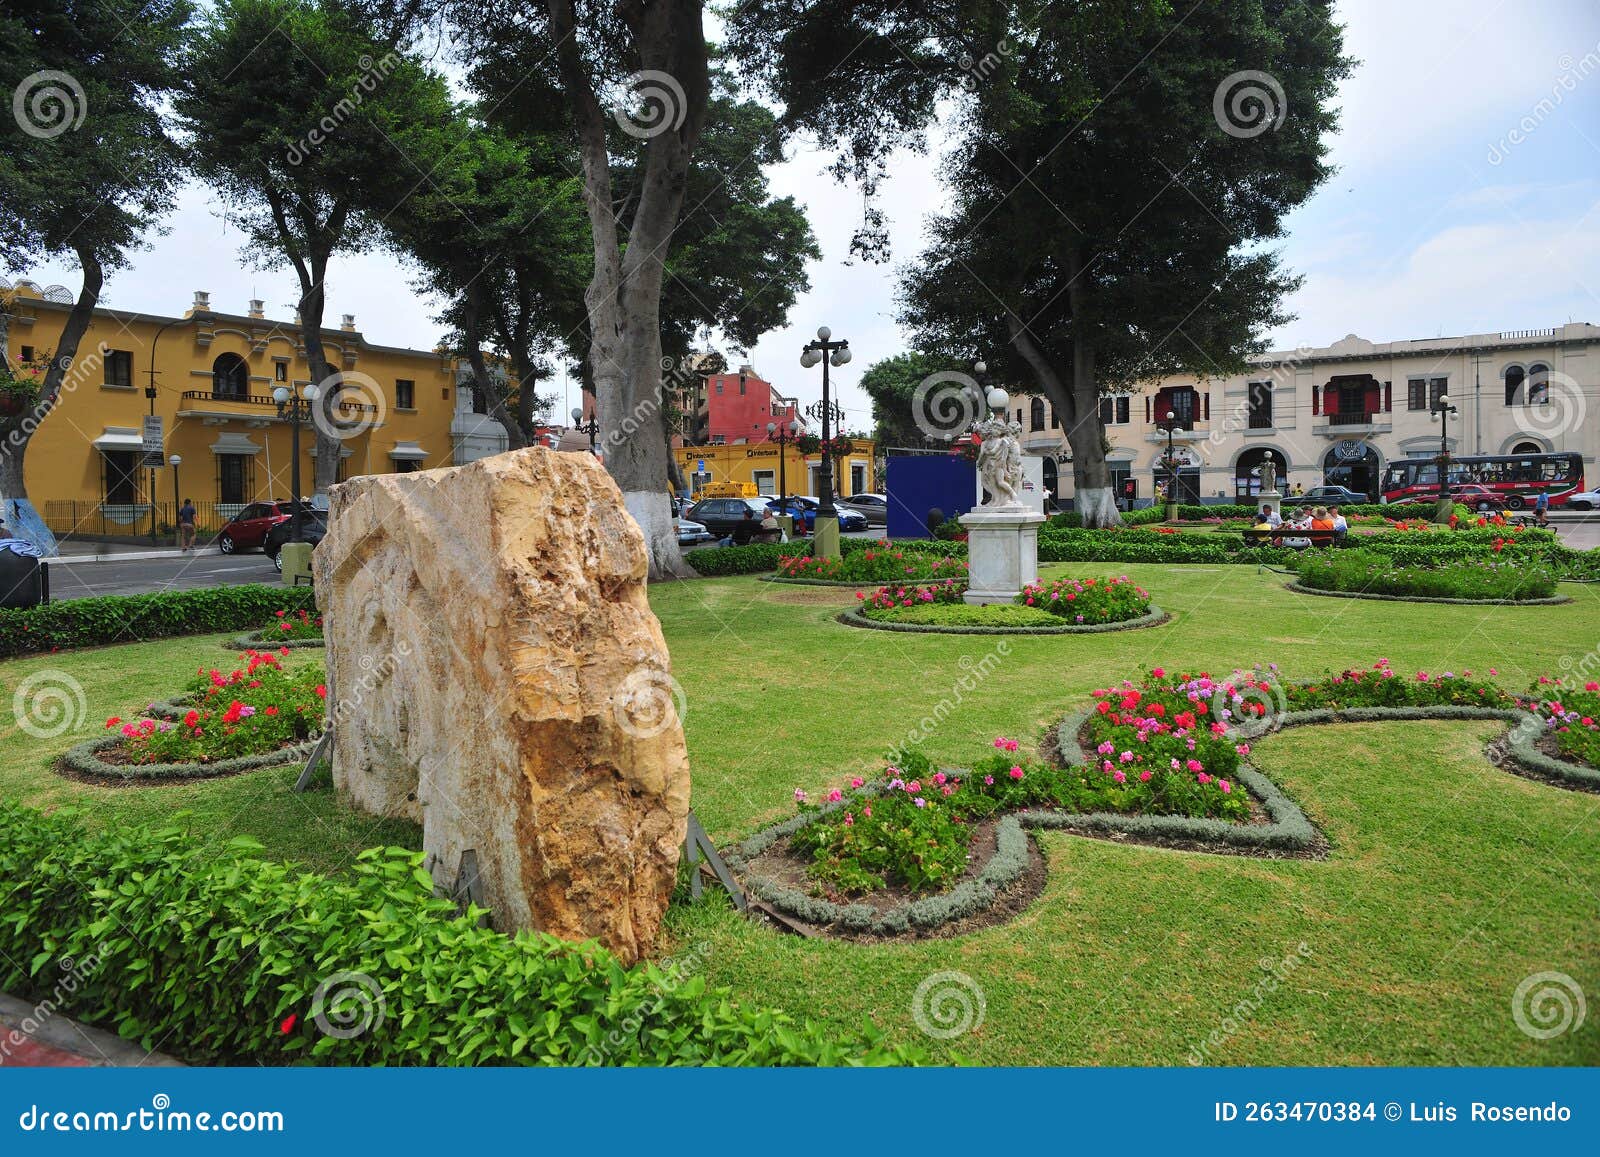 barranco lima-garden and flower square background arquitecture and building